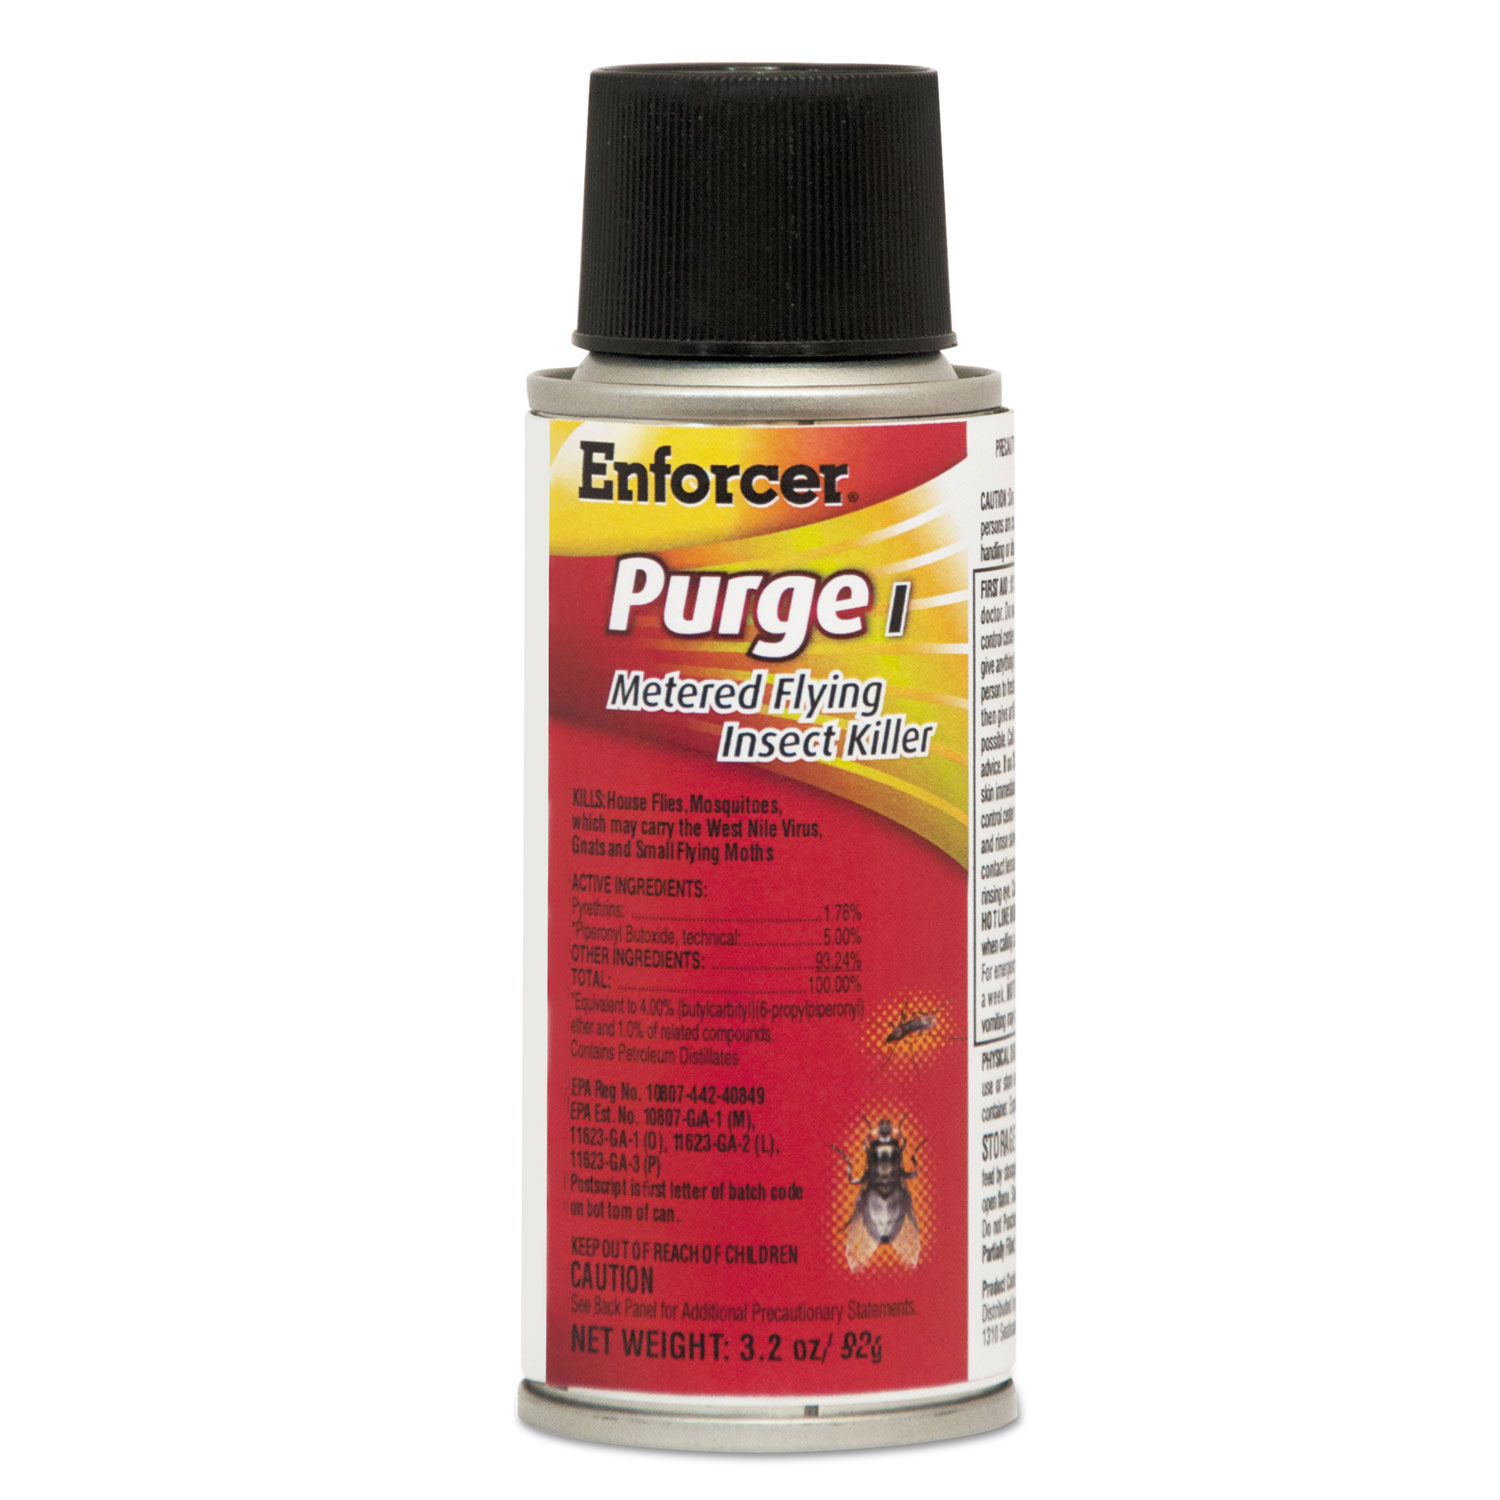 Purge I Micro Metered Flying Insect Killer, 3.2oz Aerosol, Unscented, 6/Carton